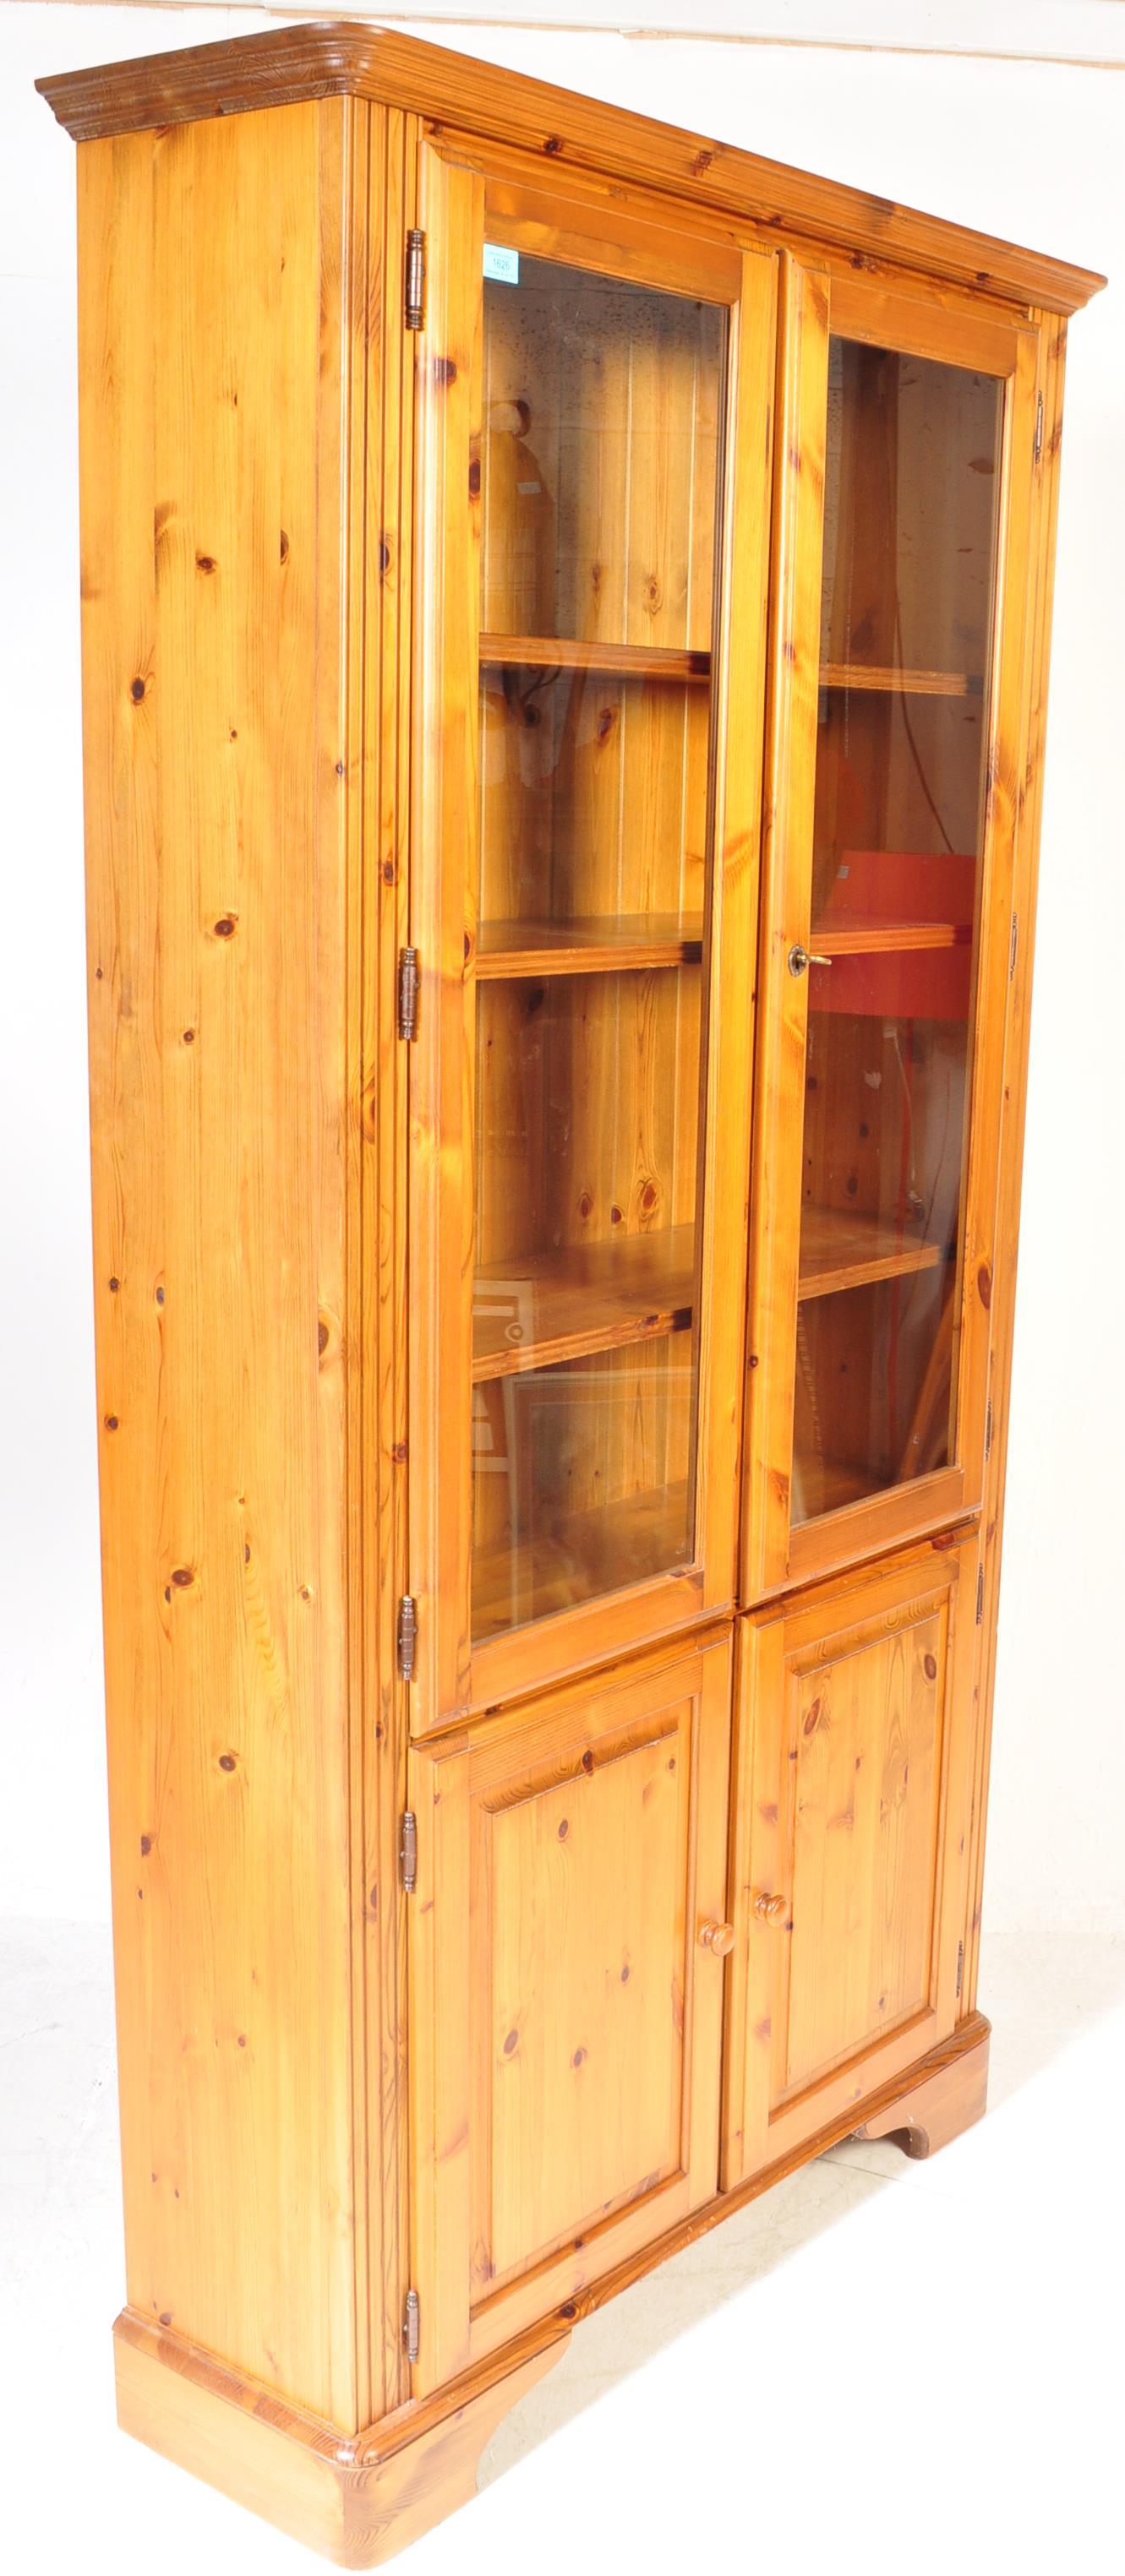 VICTORIAN REVIVAL LARGE PINE LIBRARY BOOKCASE CABINET - Image 3 of 4